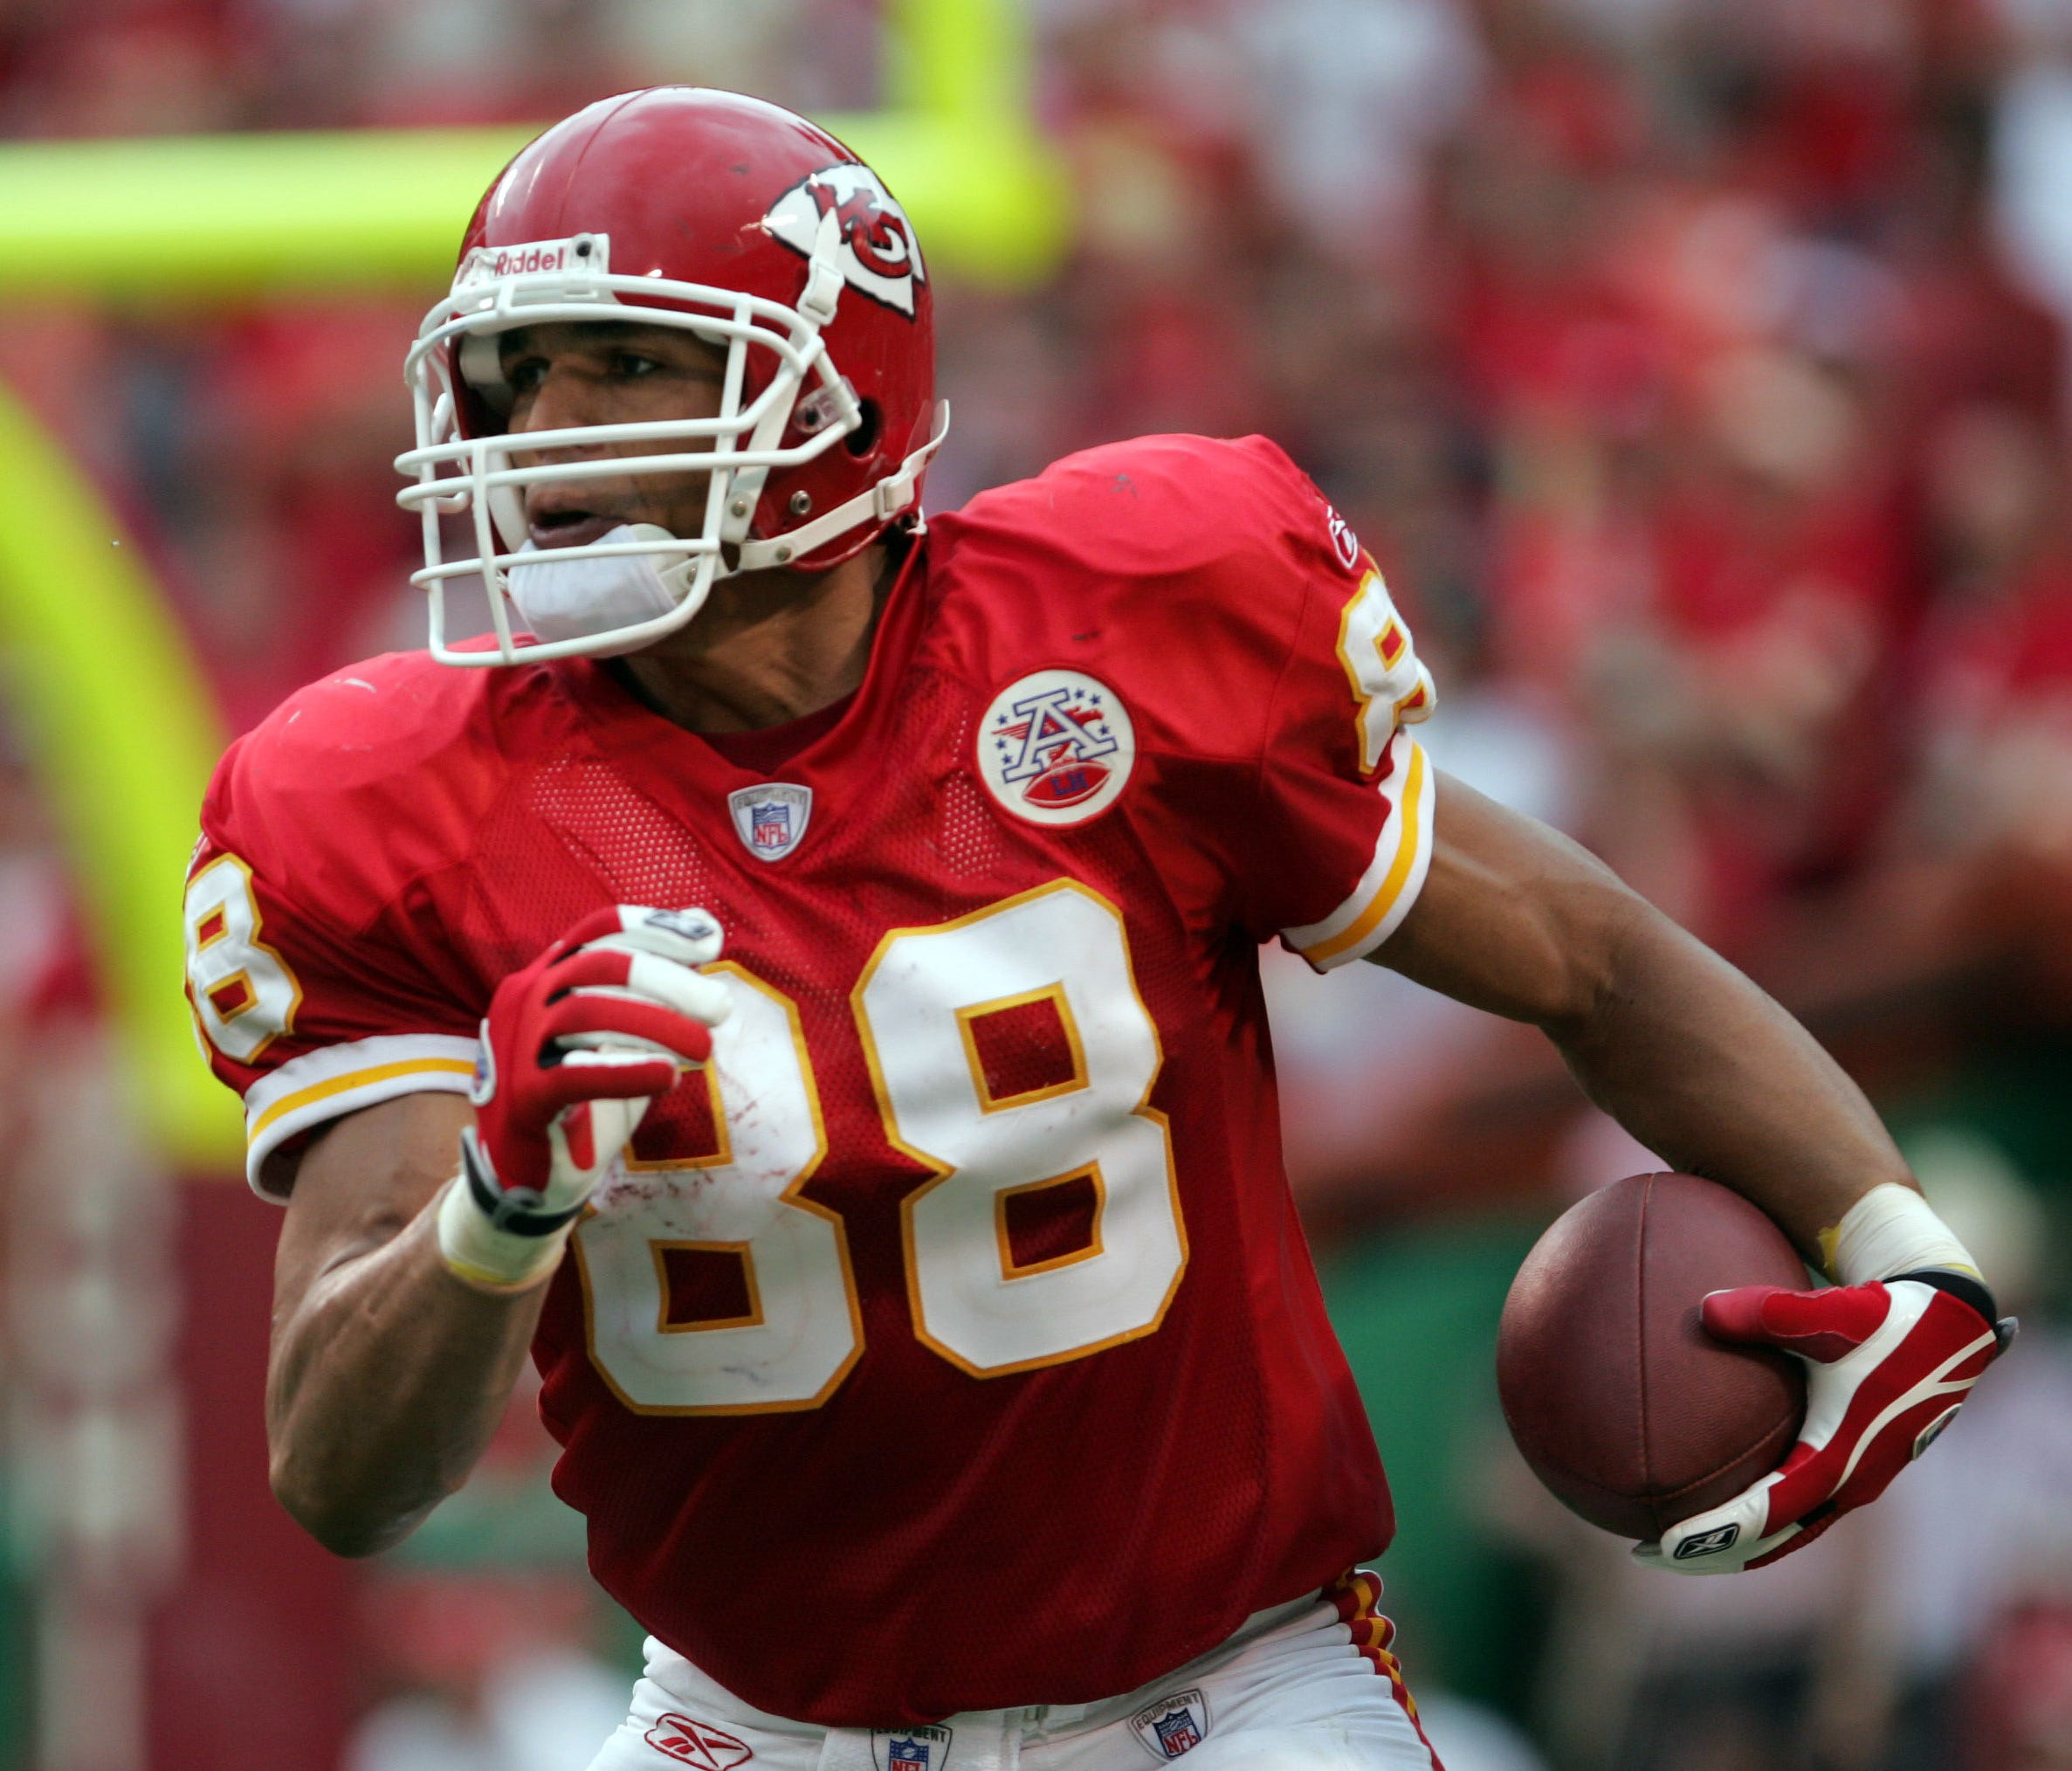 Tony Gonzalez has the most career receptions and receiving yards among tight ends in NFL history.